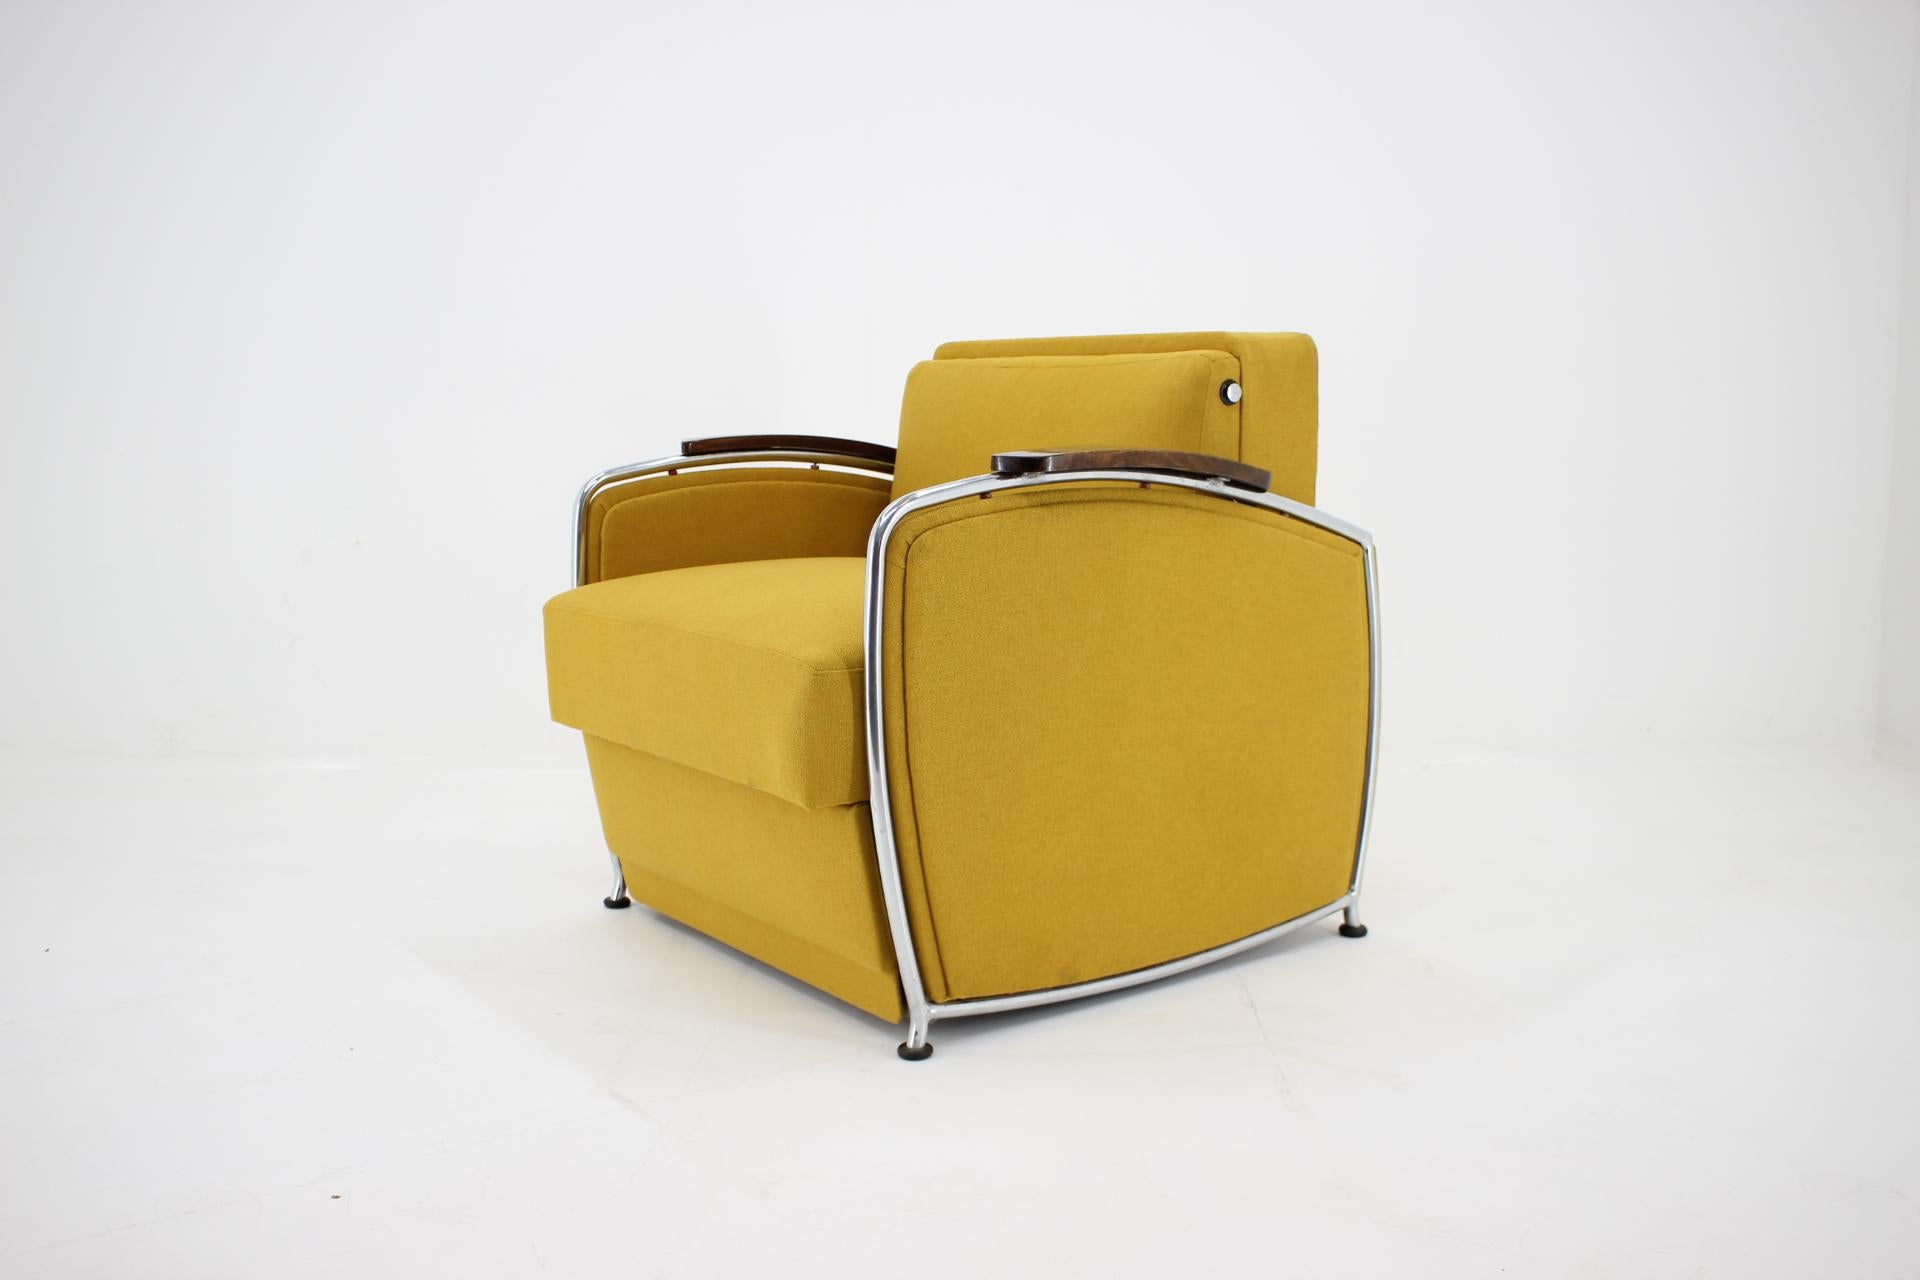 Showed in Brussel Expo 1958. Newly upholstered.